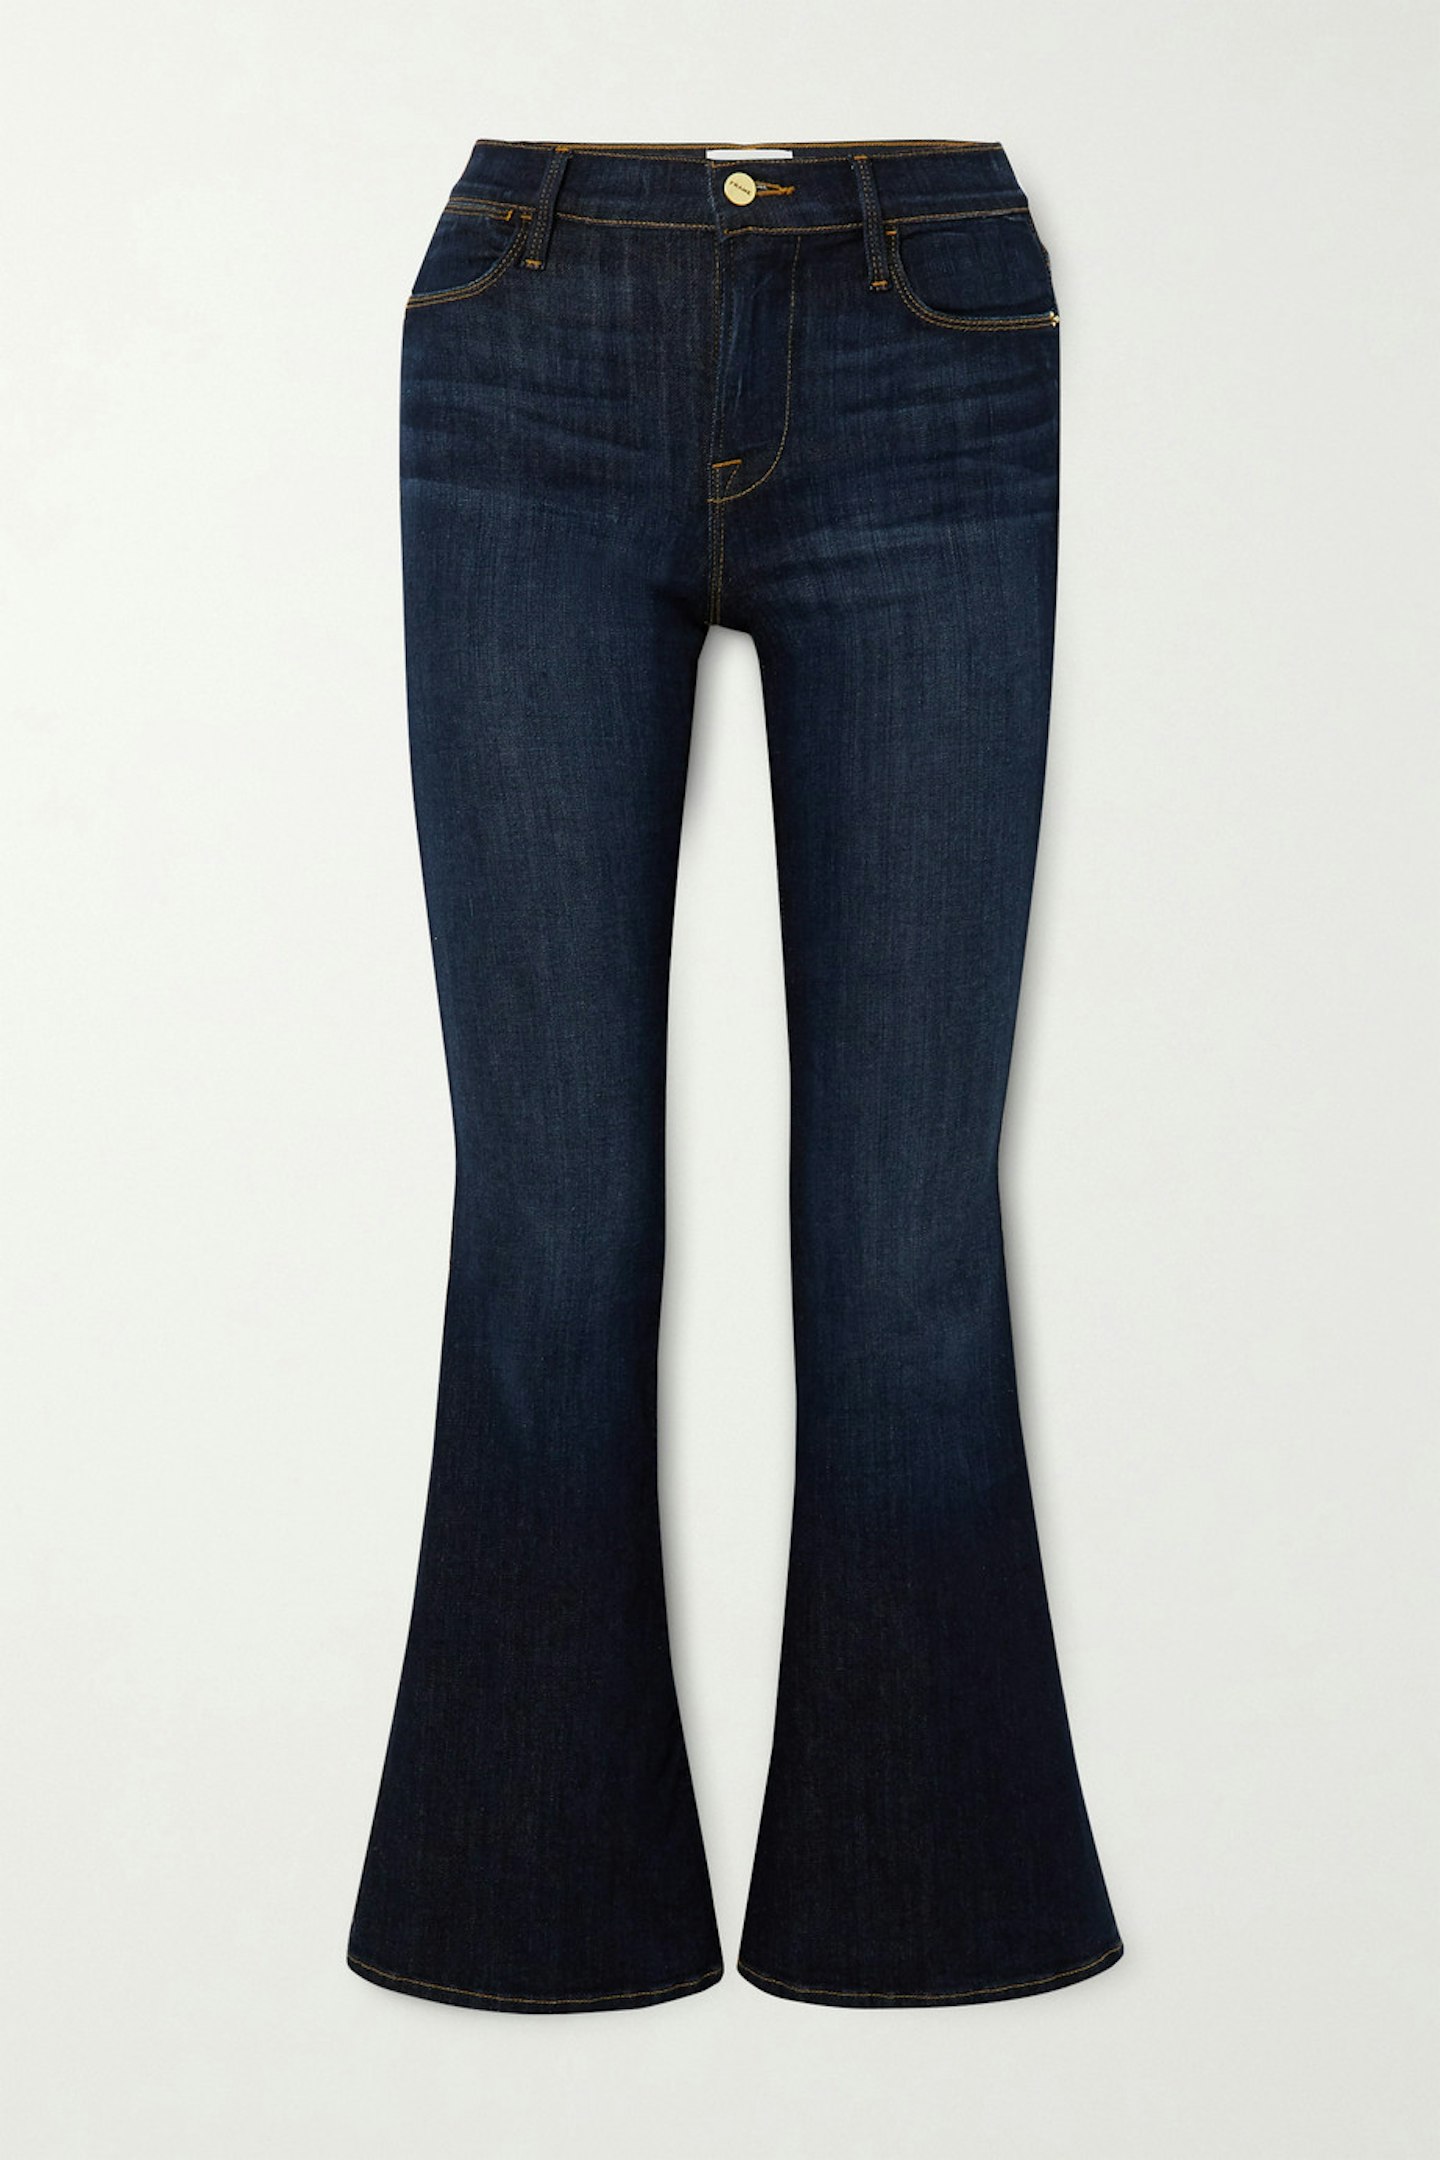 Frame, Le Pixie cropped high-rise flared jeans, £235